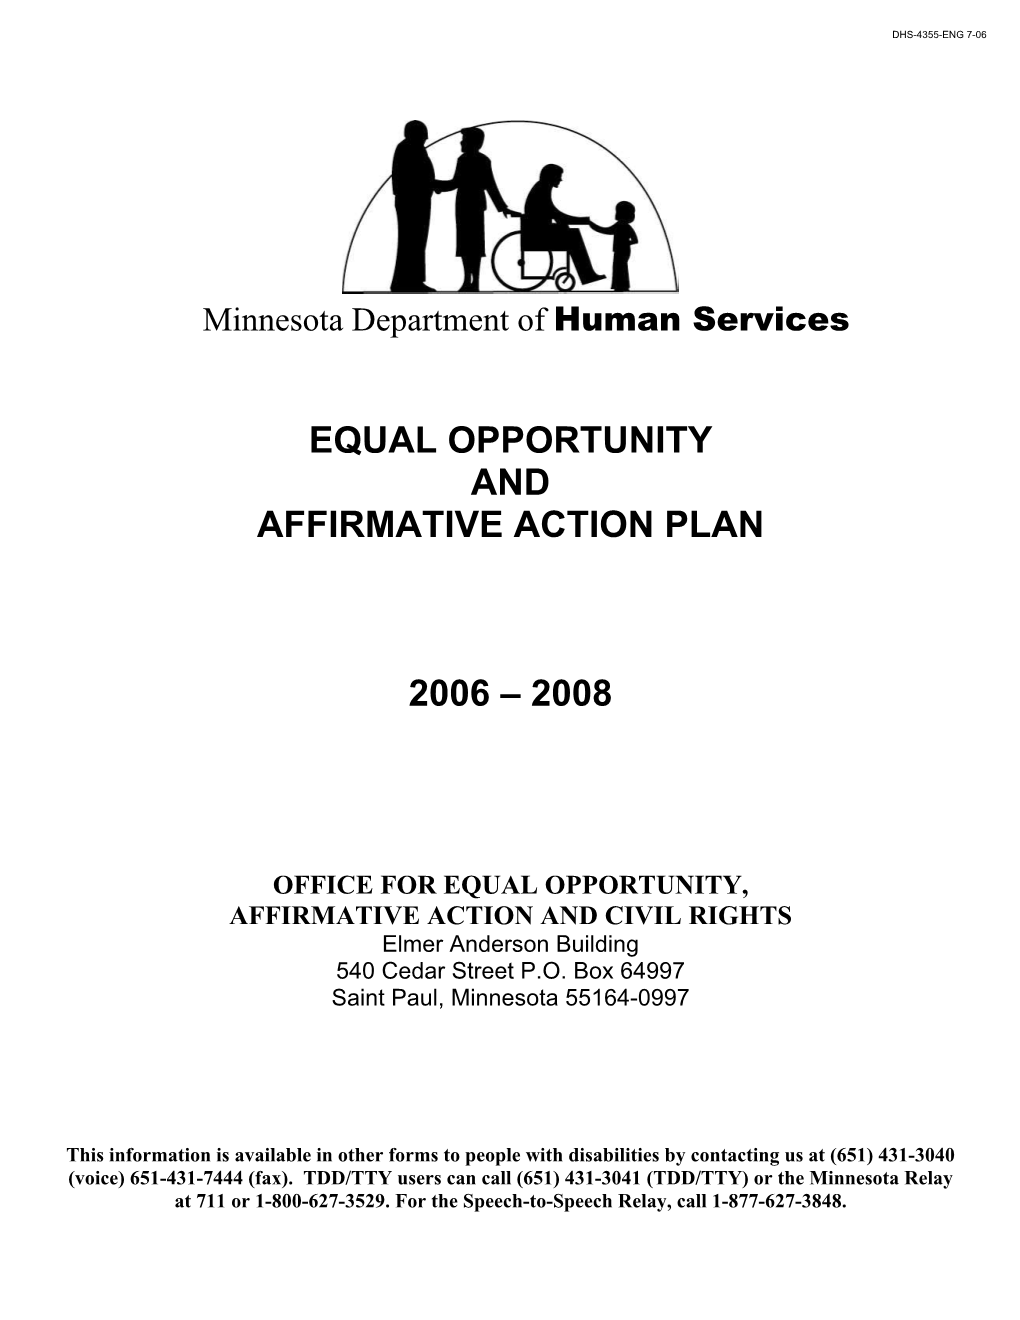 Equal Opportunity and Affirmative Action Plan 2006